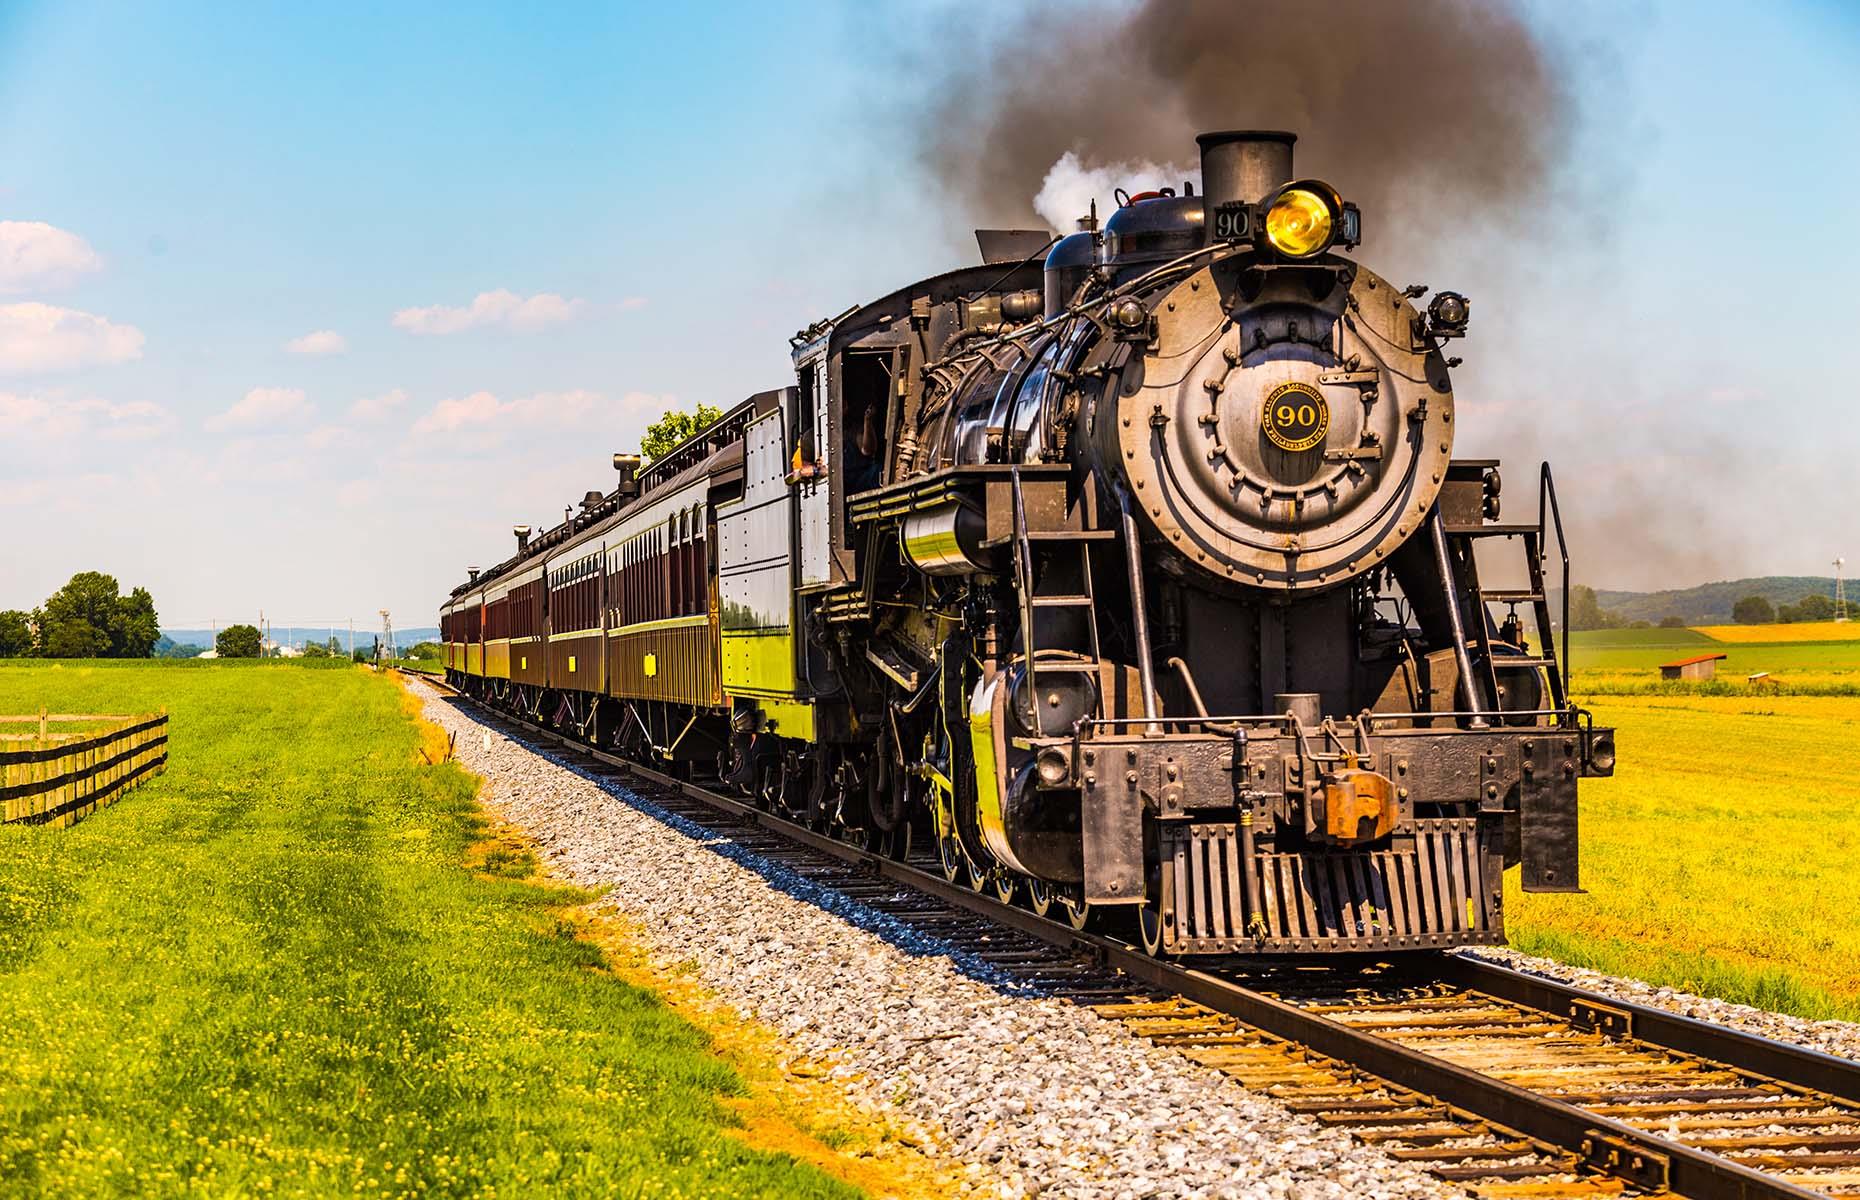 <p>America’s oldest operating railroad, the <a href="https://www.strasburgrailroad.com/">Strasburg Rail Road</a> first puffed off the buffers in 1832. Today it takes its passengers on a whistle-stop tour through Pennsylvanian Amish country. Touring the farmlands of Lancaster County, tended by the Amish, the regular excursion is a short but sweet 4.5 mile (7.2km) journey each way.</p>